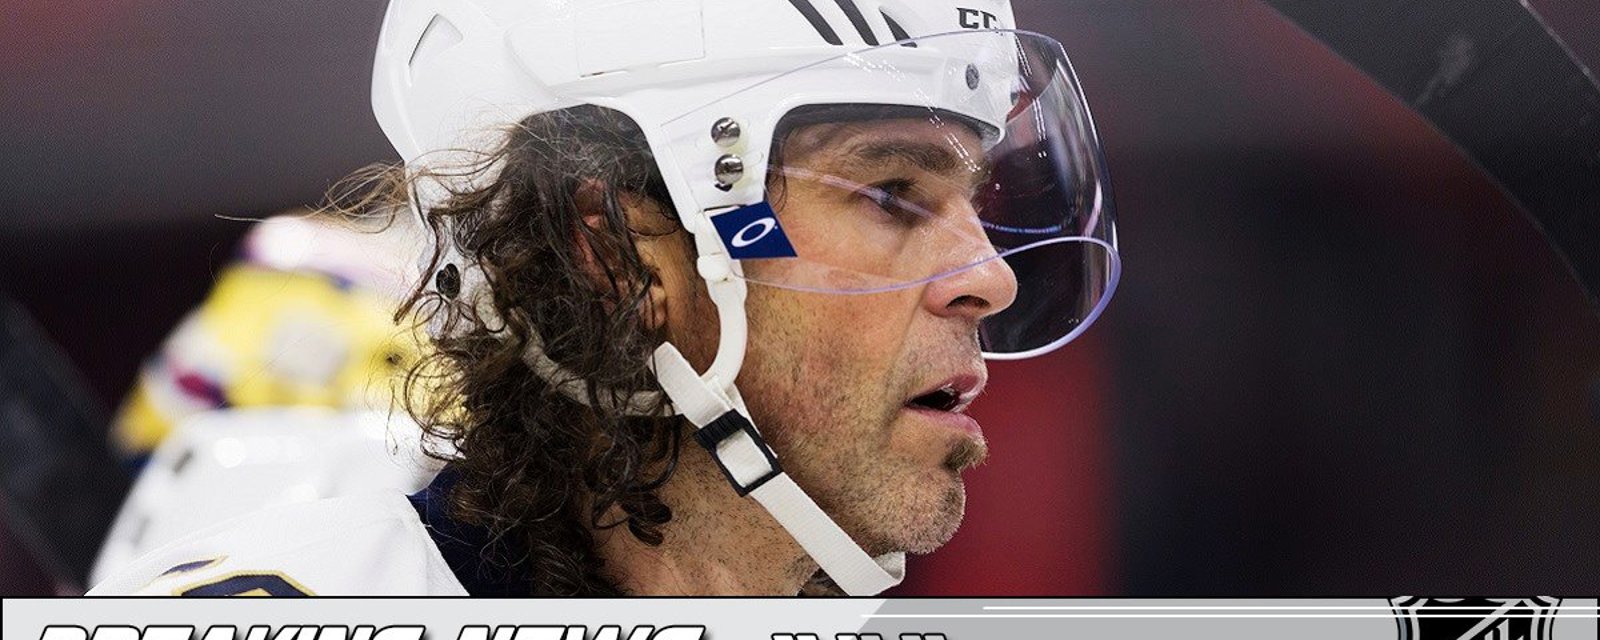 More bad news for Jaromir Jagr, and a huge disappointment for Penguin fans.